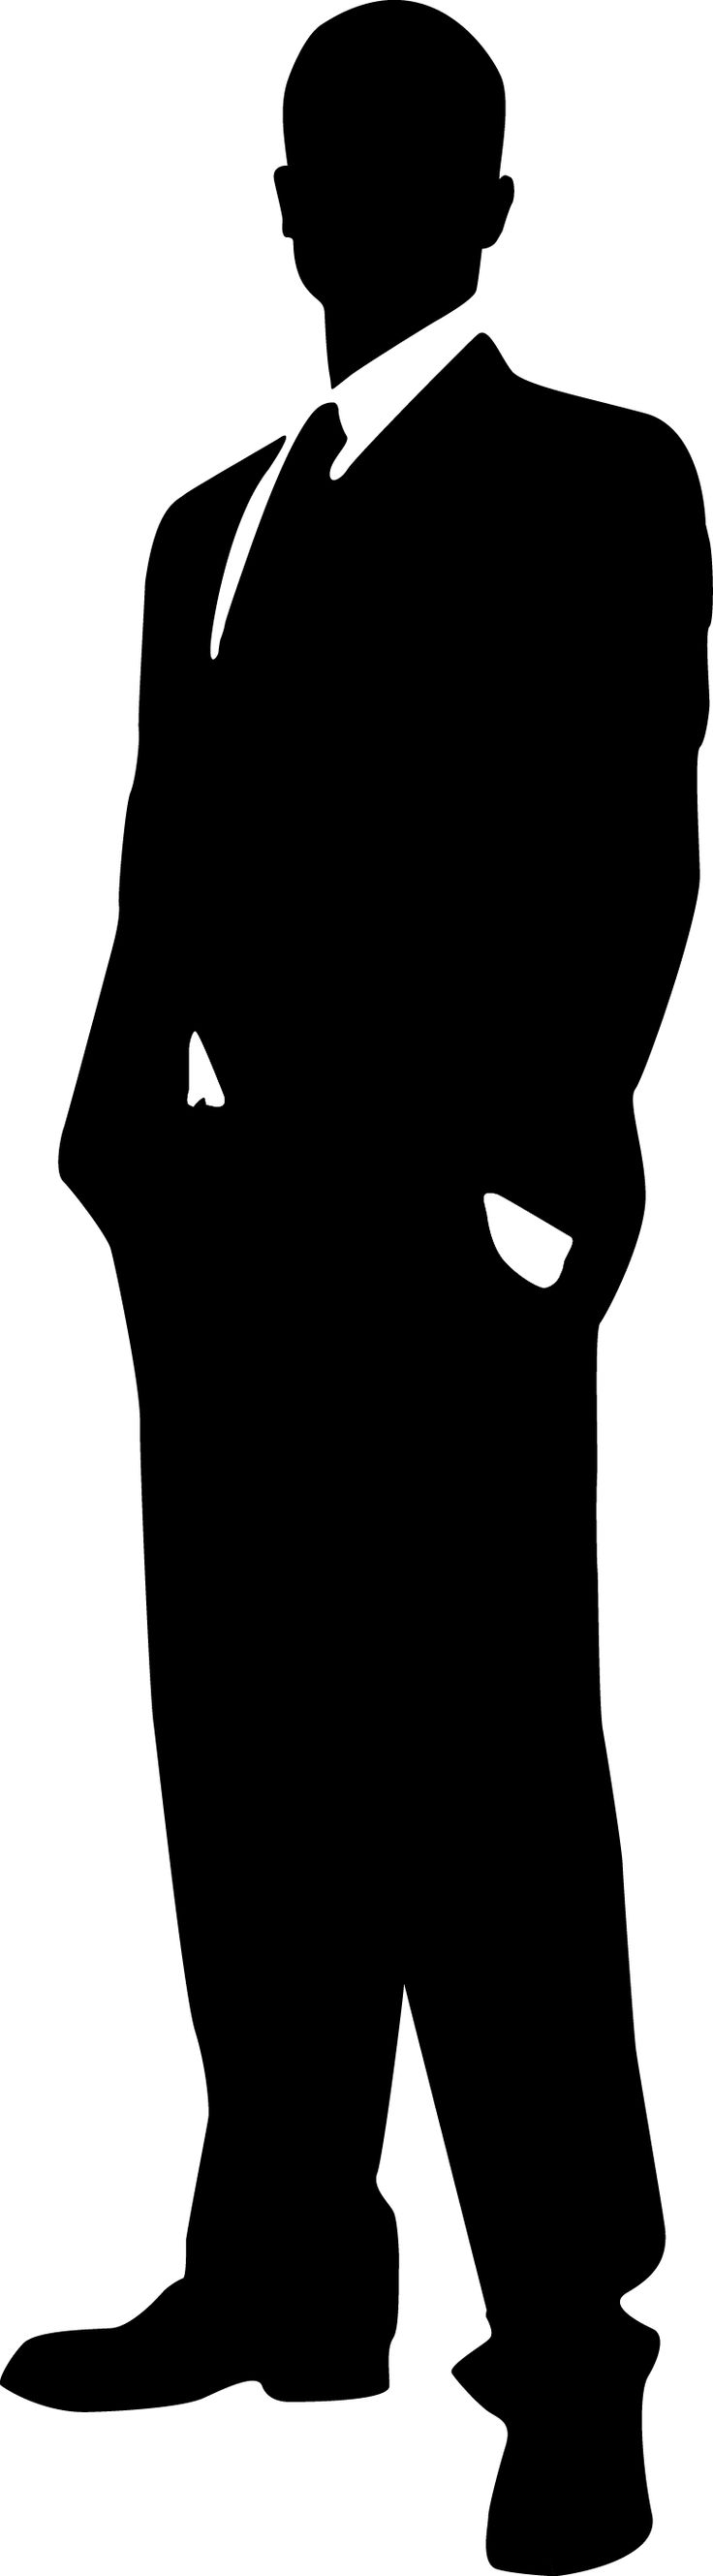 Man Silhouette Clip Art - Bing Images | Cards | Clipart library